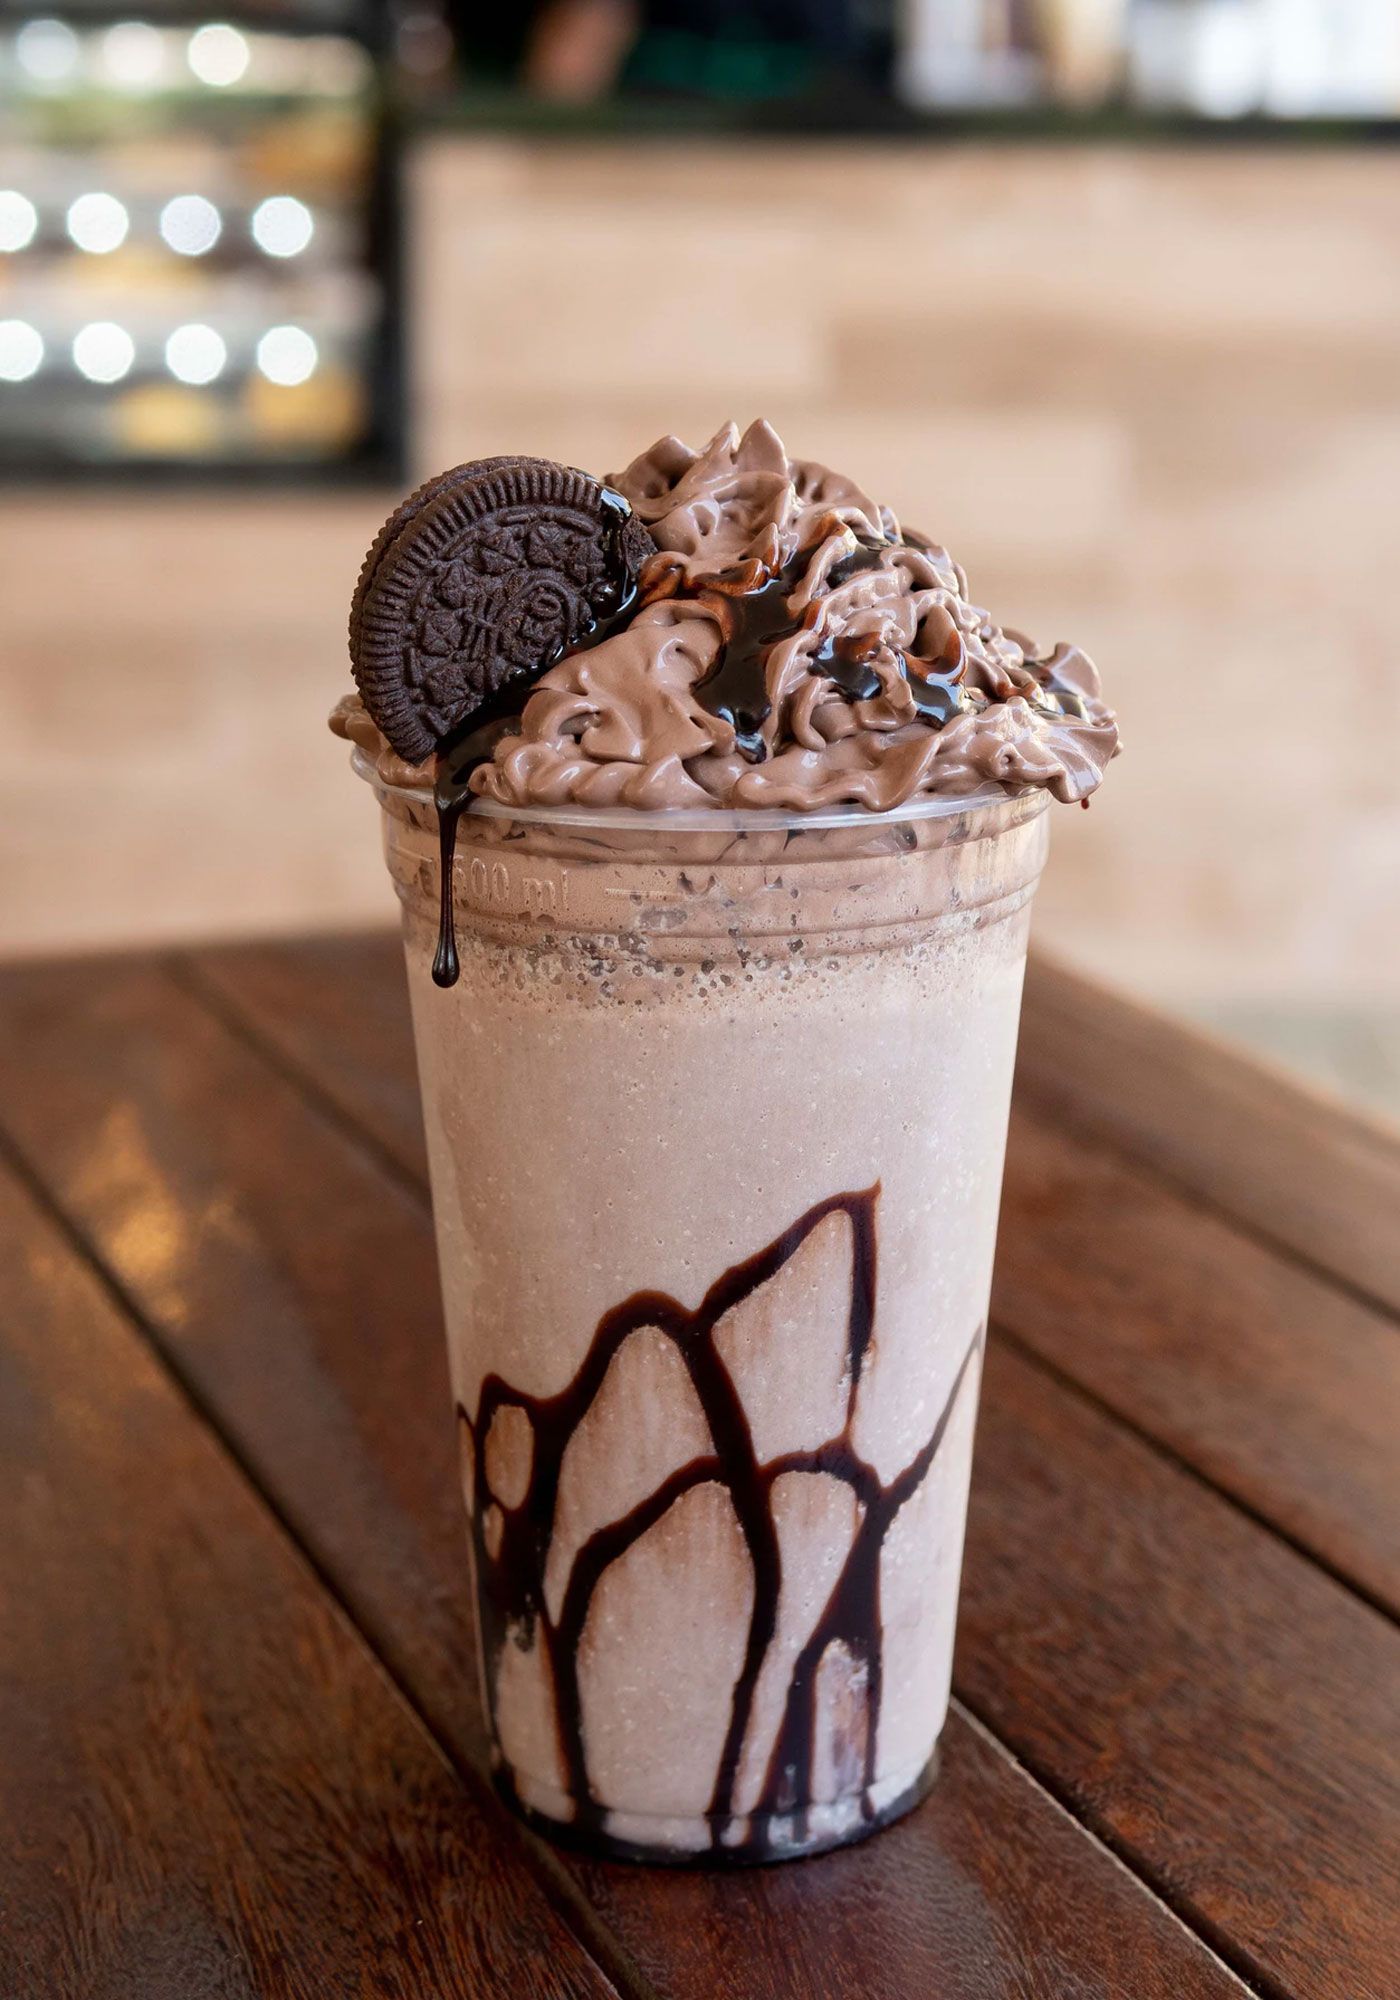 choco-cookie-frappe